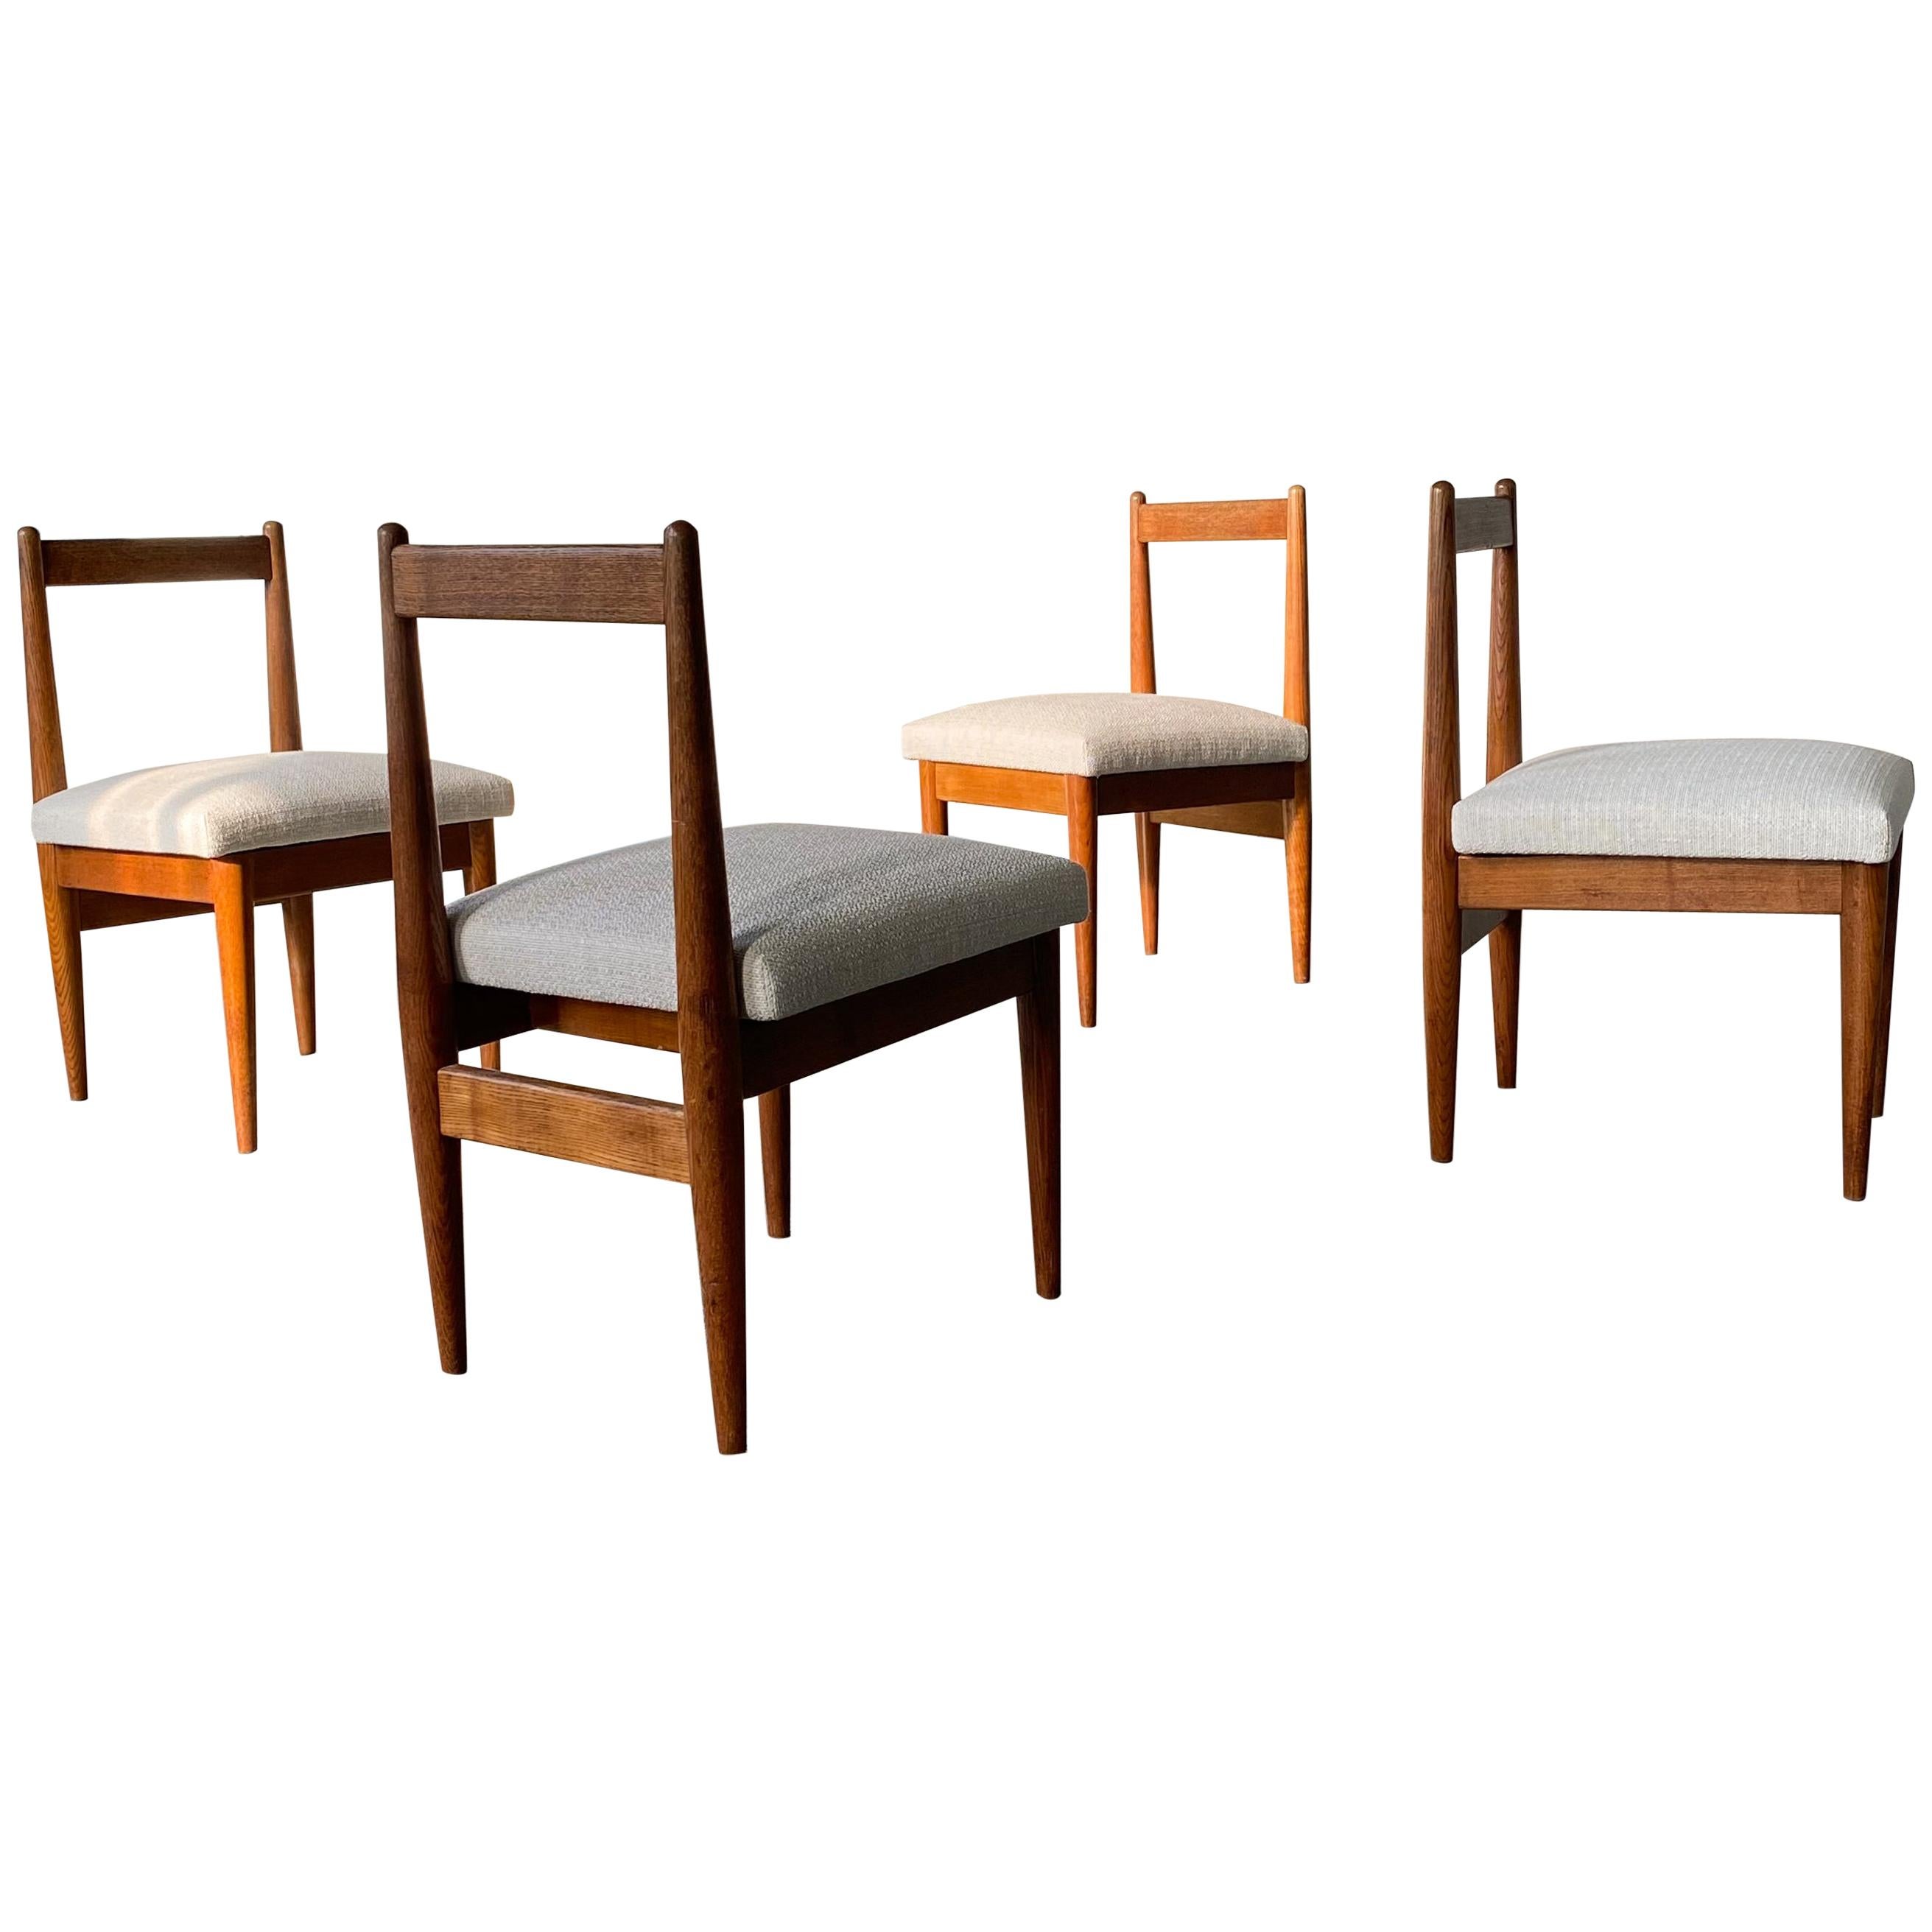 Set of Four Chairs by Katsuo Matsumura